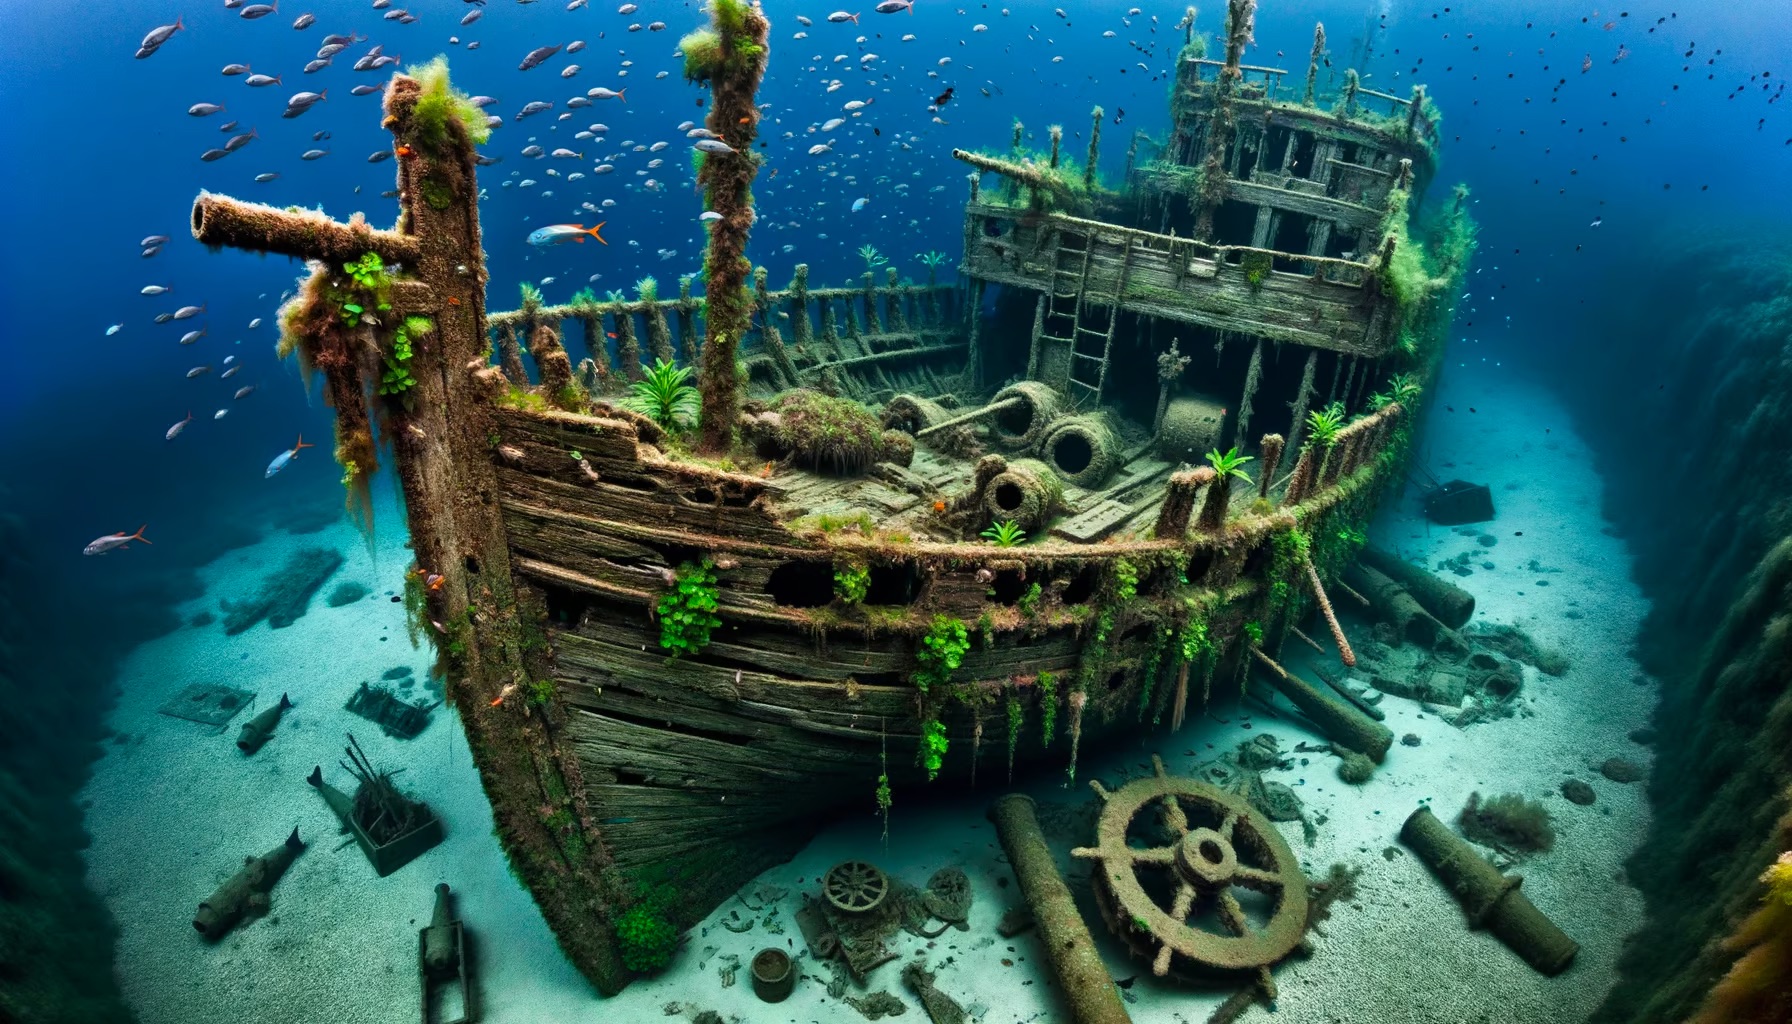 Dall-e 3: A photo of an ancient shipwreck nestled on the ocean floor. Marine plants have claimed the wooden structure, and fish swim in and out of its hollow spaces. Sunken treasures and old cannons are scattered around, providing a glimpse into the past.